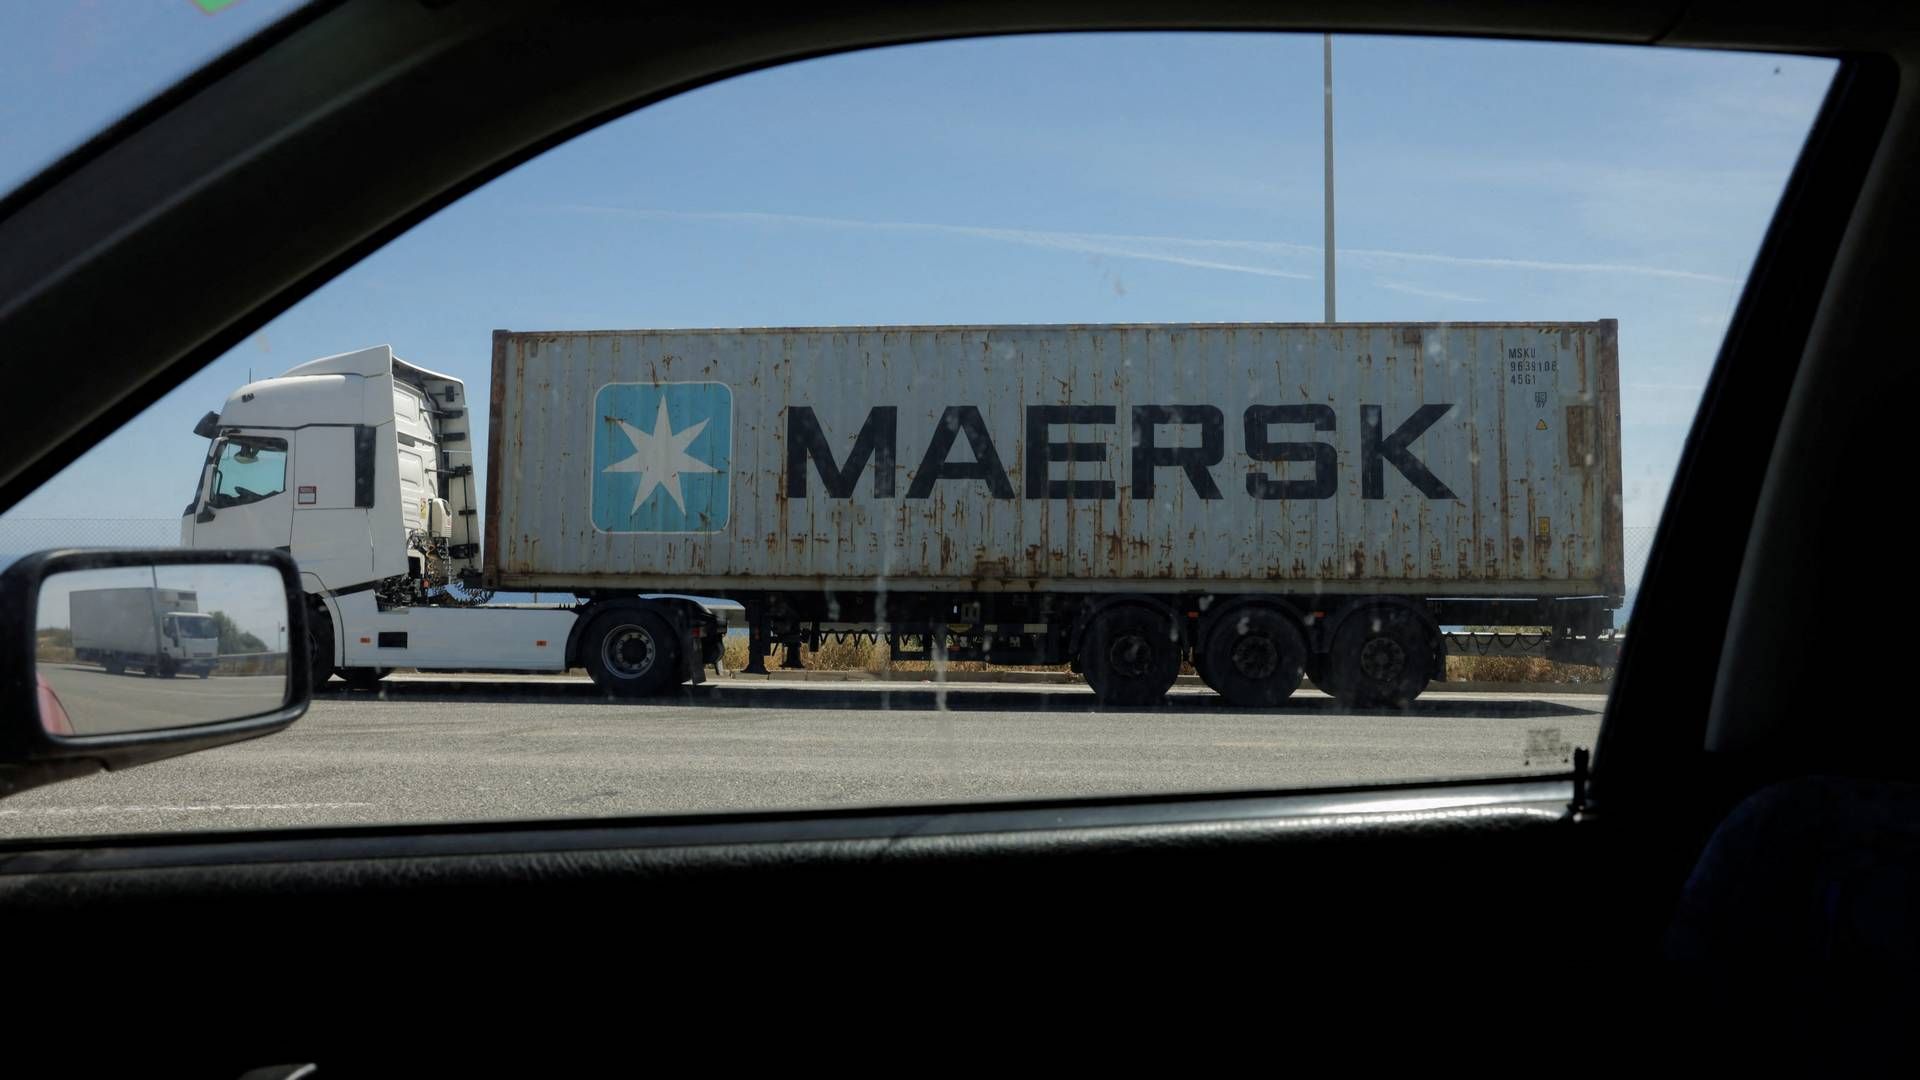 In 2016, Maersk decided to sell its oil business and instead become a pure transportation group that can handle freight all the way from the factory to the end user. As a result, the company now has a growing business on land. | Photo: Jon Nazca/Reuters/Ritzau Scanpix